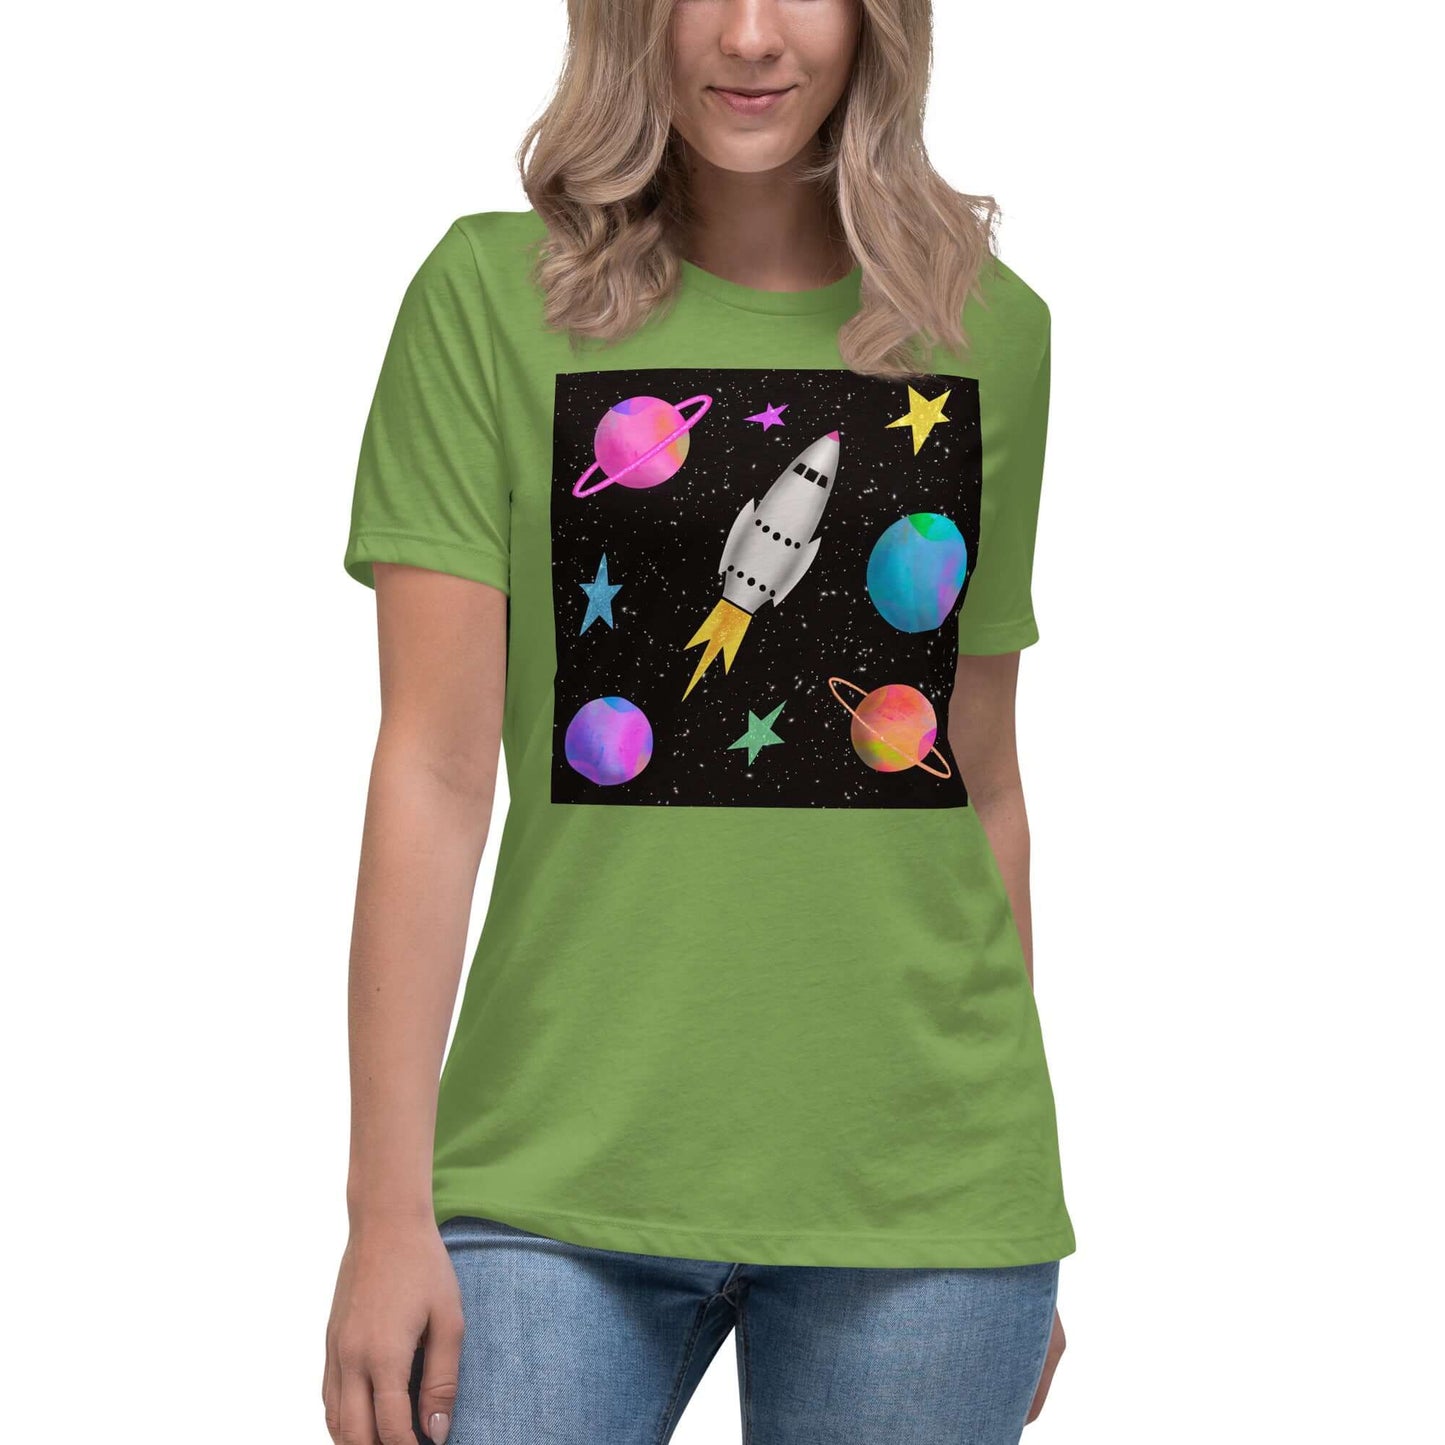 Rocket with Colorful Stars and Planets “Space Rockets” Women’s Short Sleeve Tee in Leaf Green